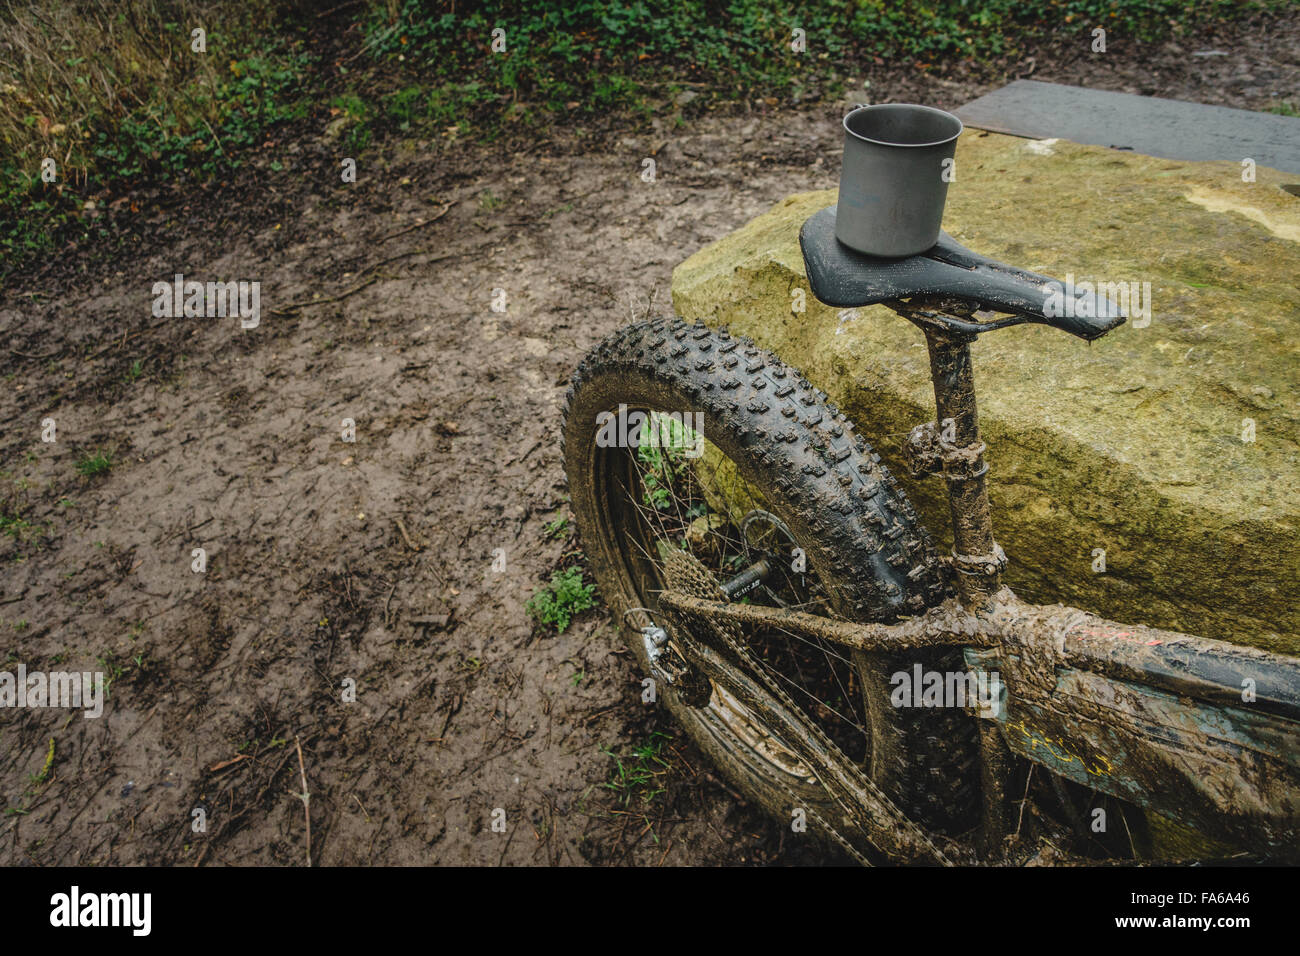 A Fat Bike parked in the countryside Stock Photo